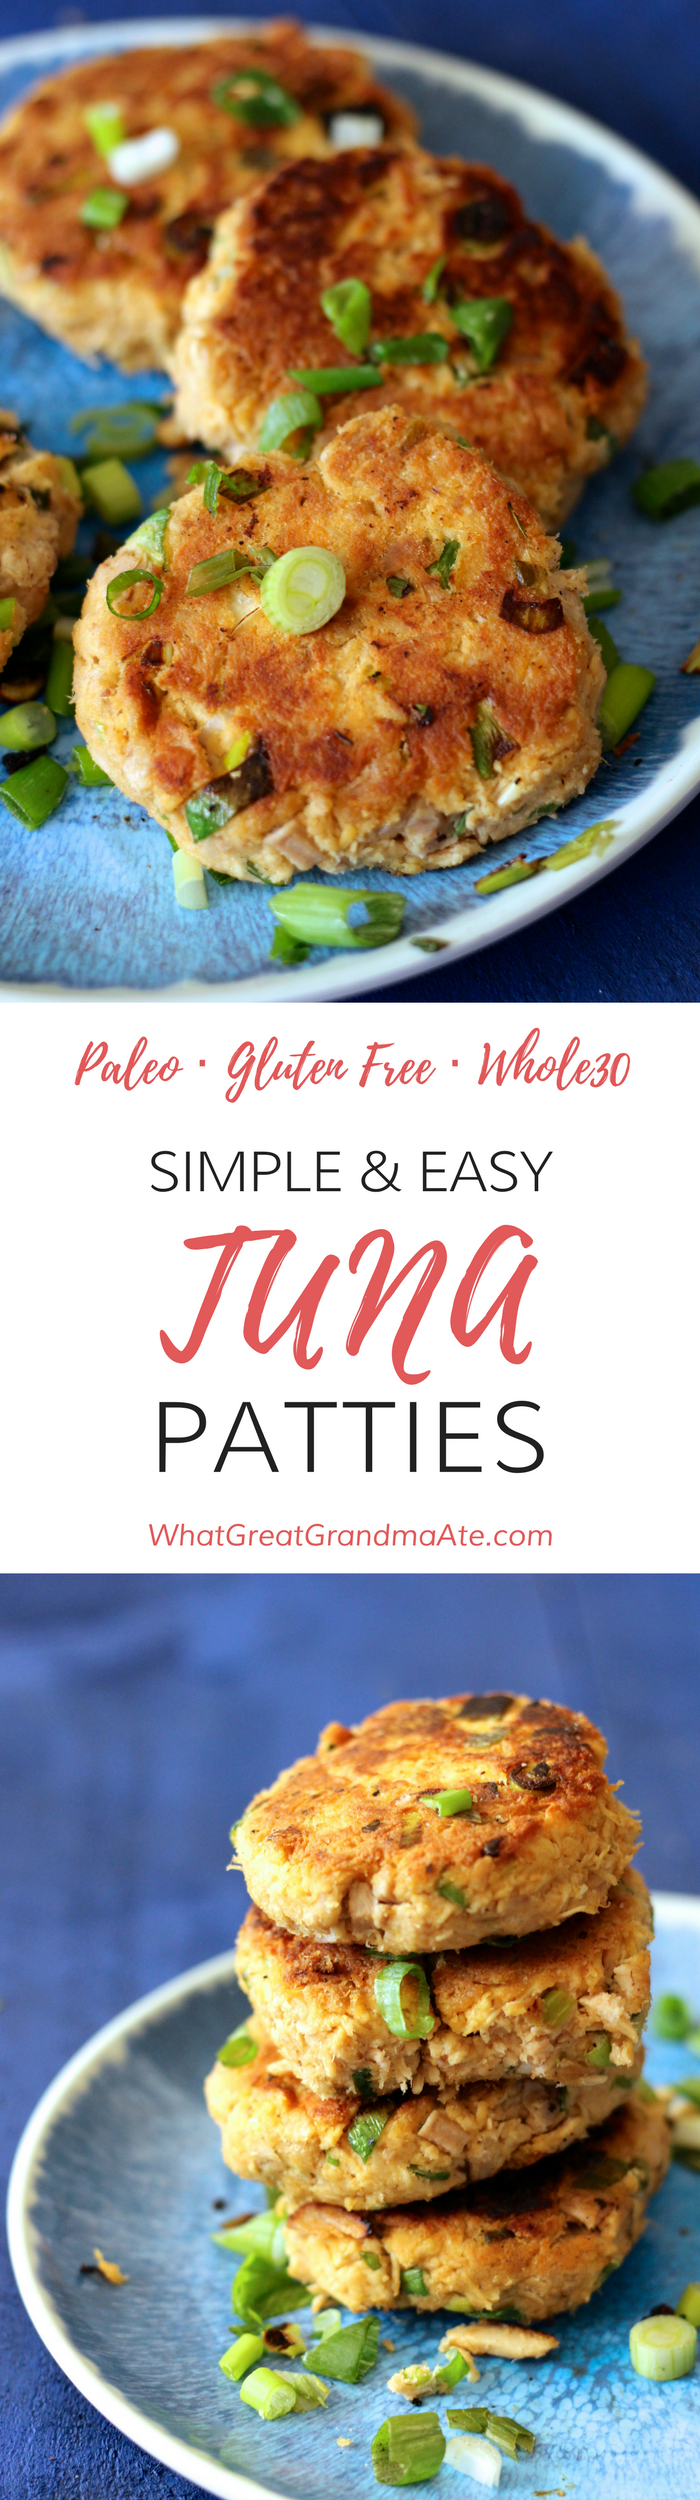 Gluten free and paleo tuna patties that take less than 15 minutes to make! It’s a delicious simple recipe your family will love.